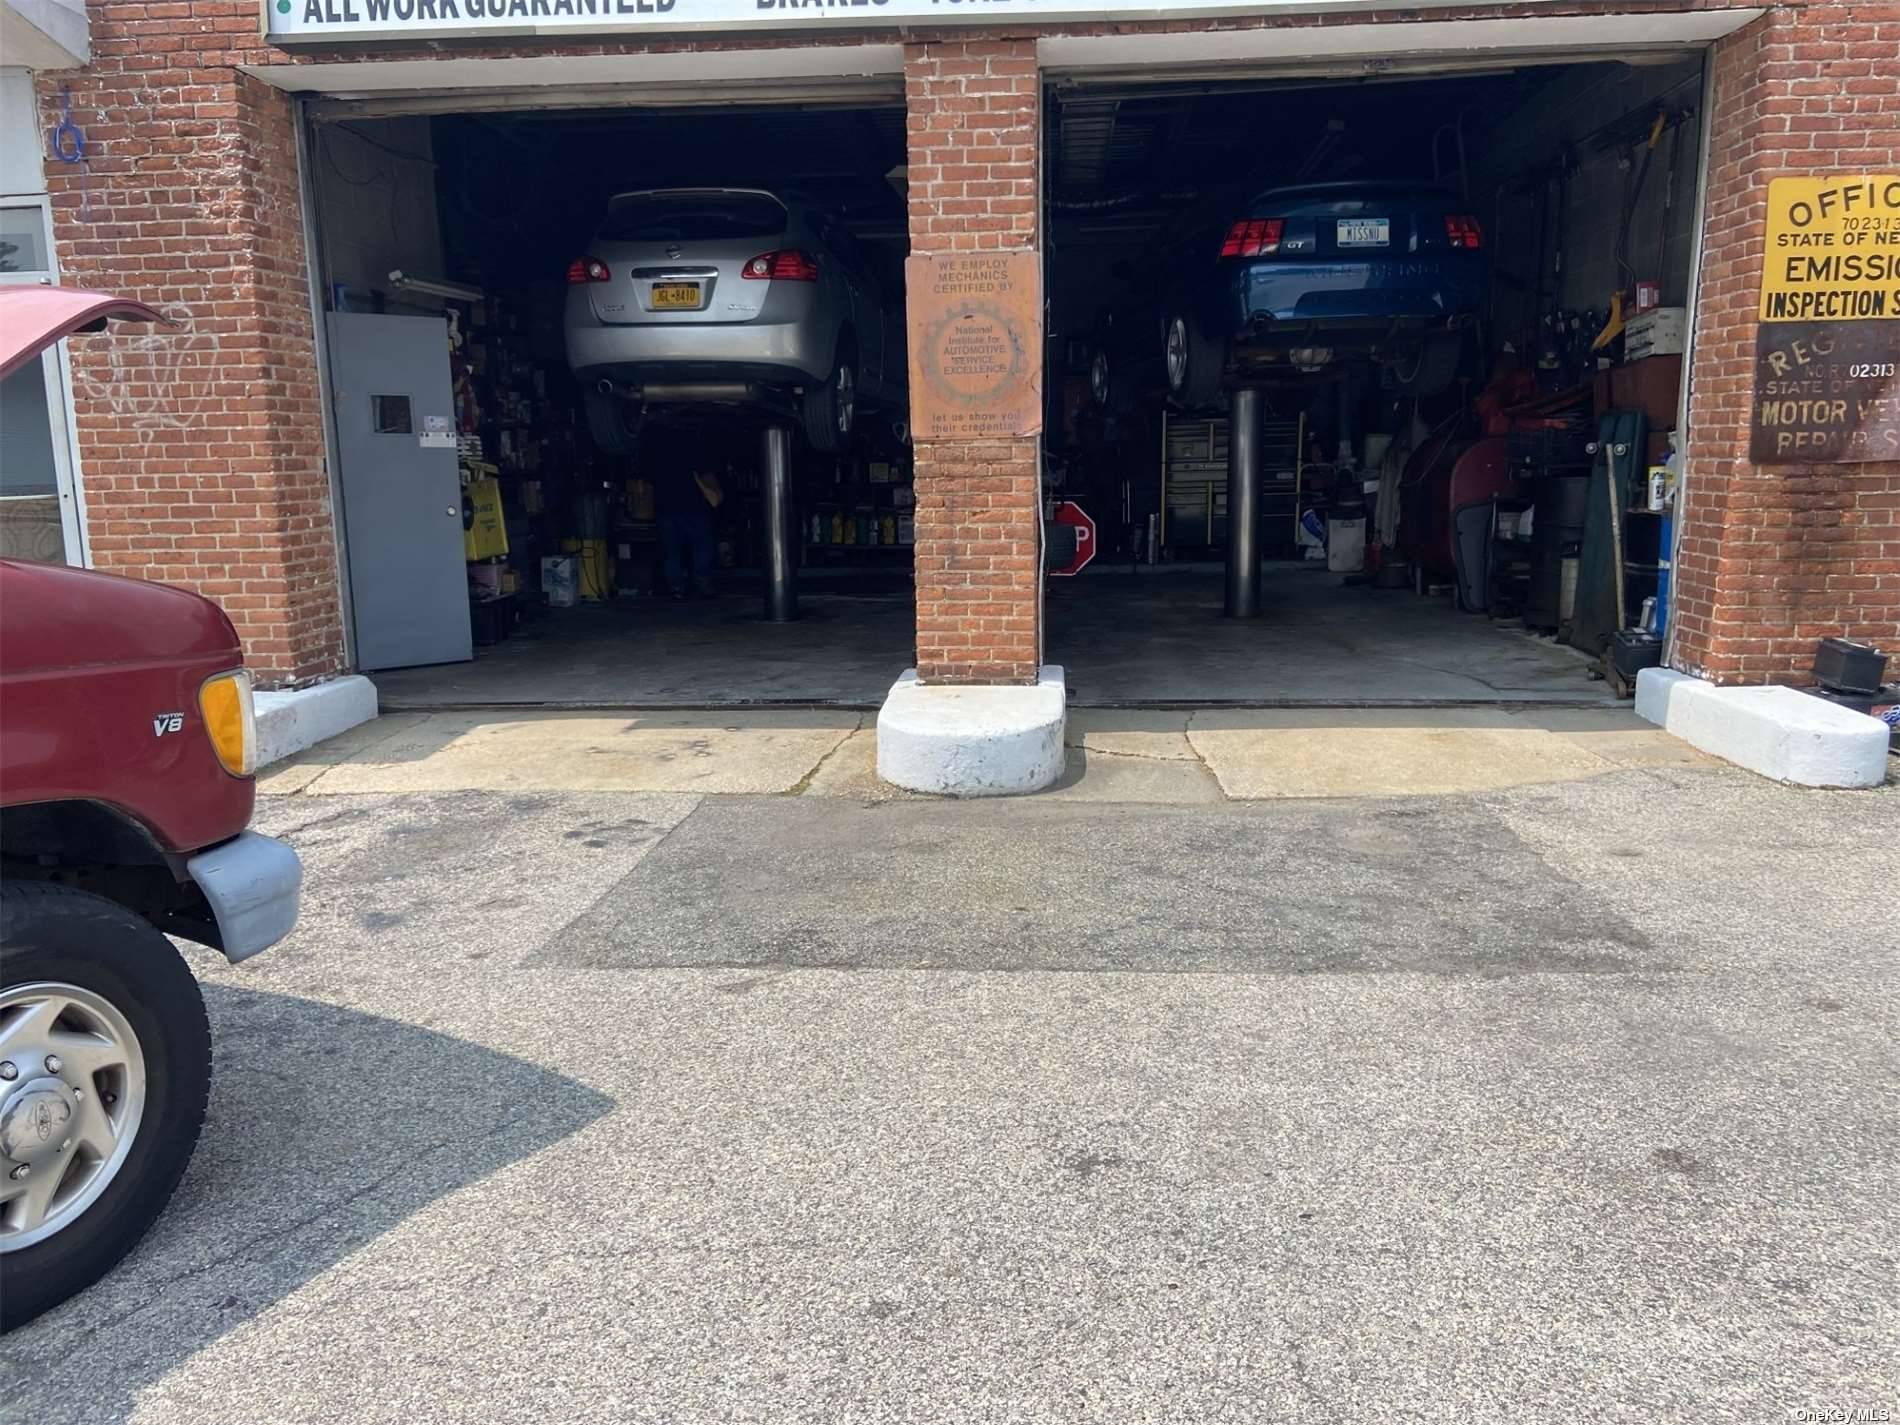 Turn Key Long Standing Auto Repair Shop With 2 Lifts, Room For 3rd Outdoor Lift With Proper Permits, Brand New Inspection Machine Available.